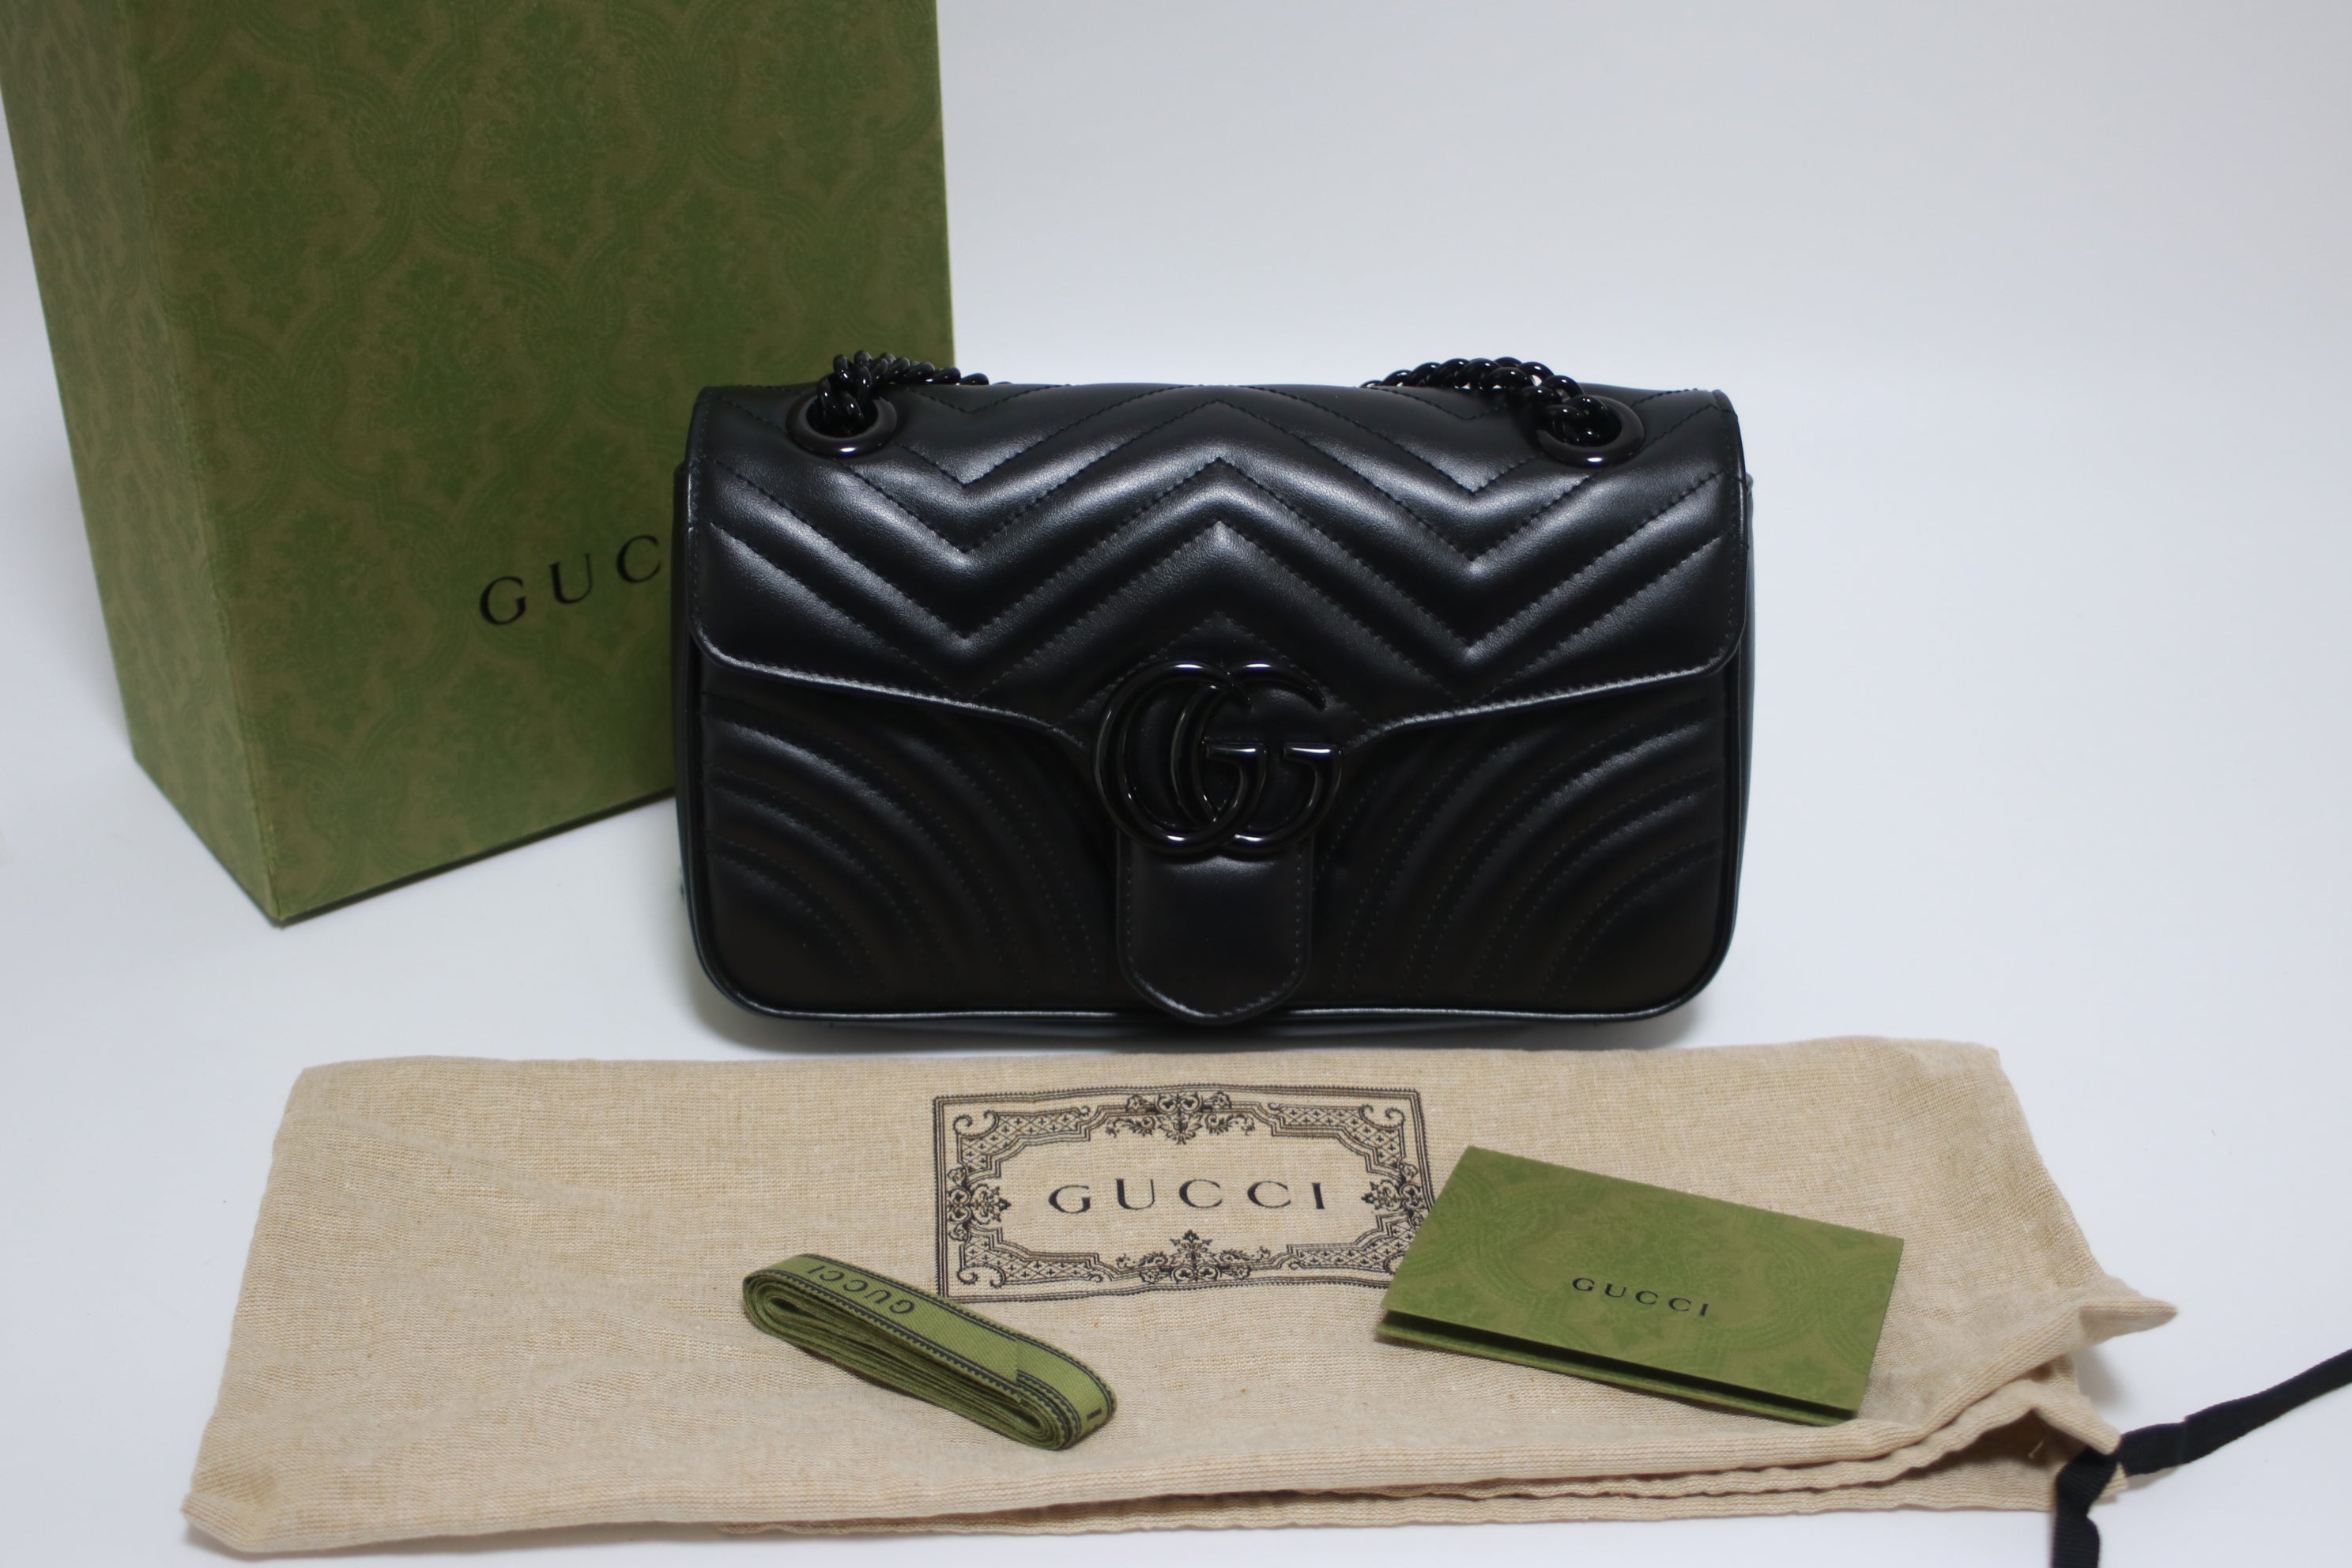 Gucci Marmont Small Shoulder Bag Used (7969)